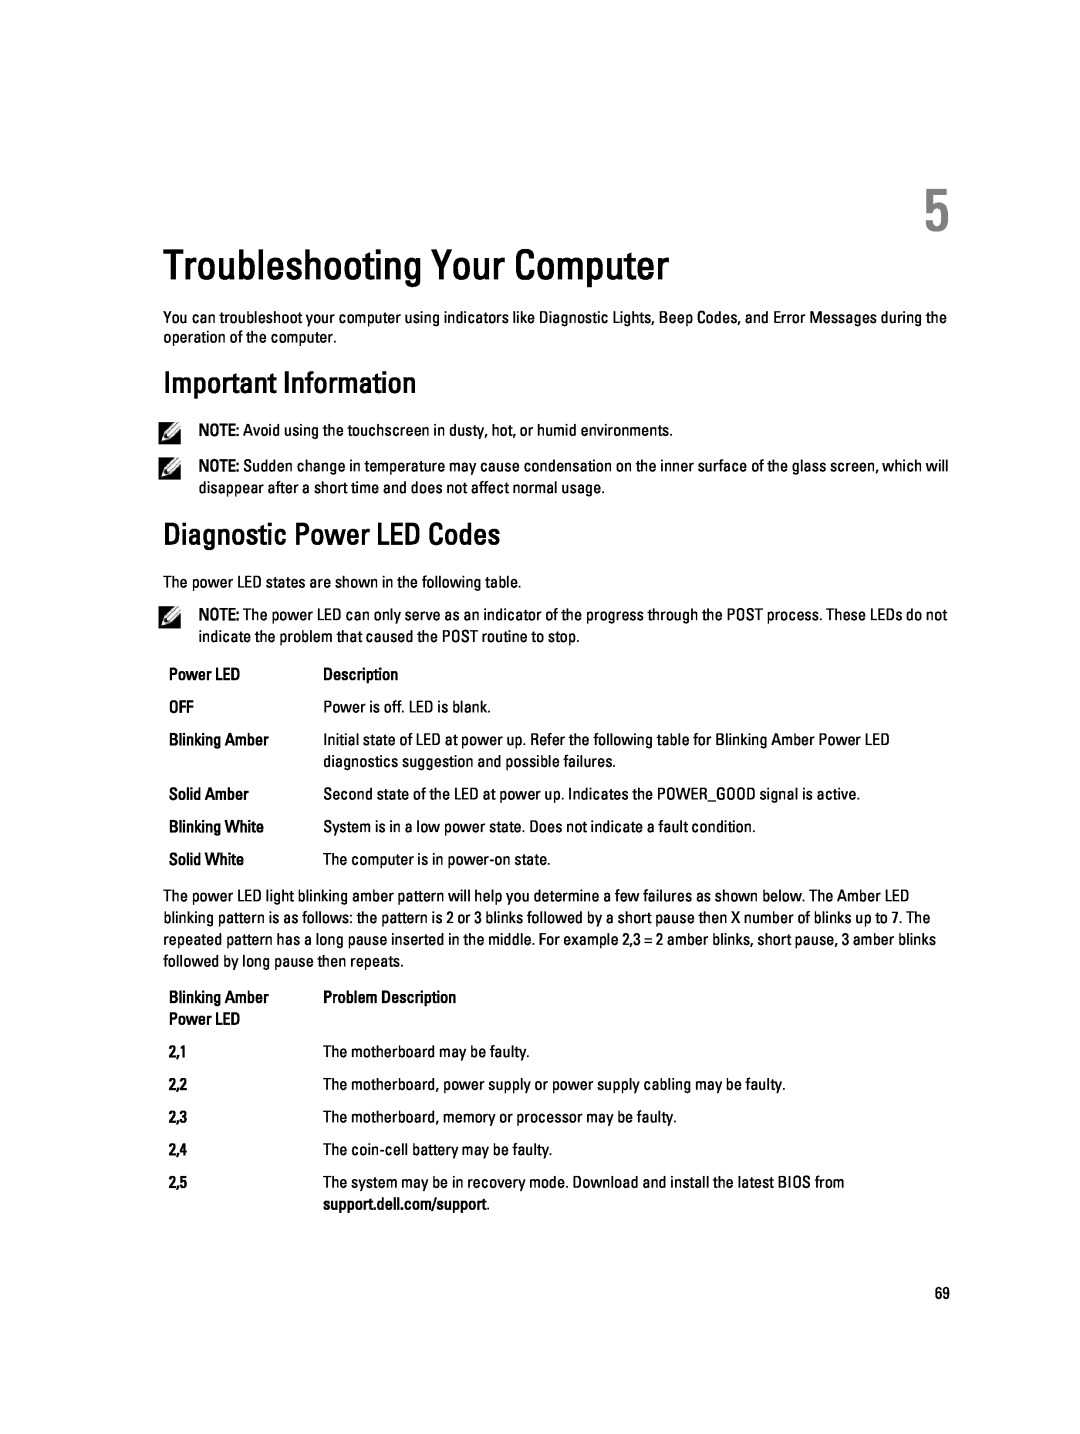 Dell 9010, W04C owner manual Troubleshooting Your Computer, Diagnostic Power LED Codes, Important Information 